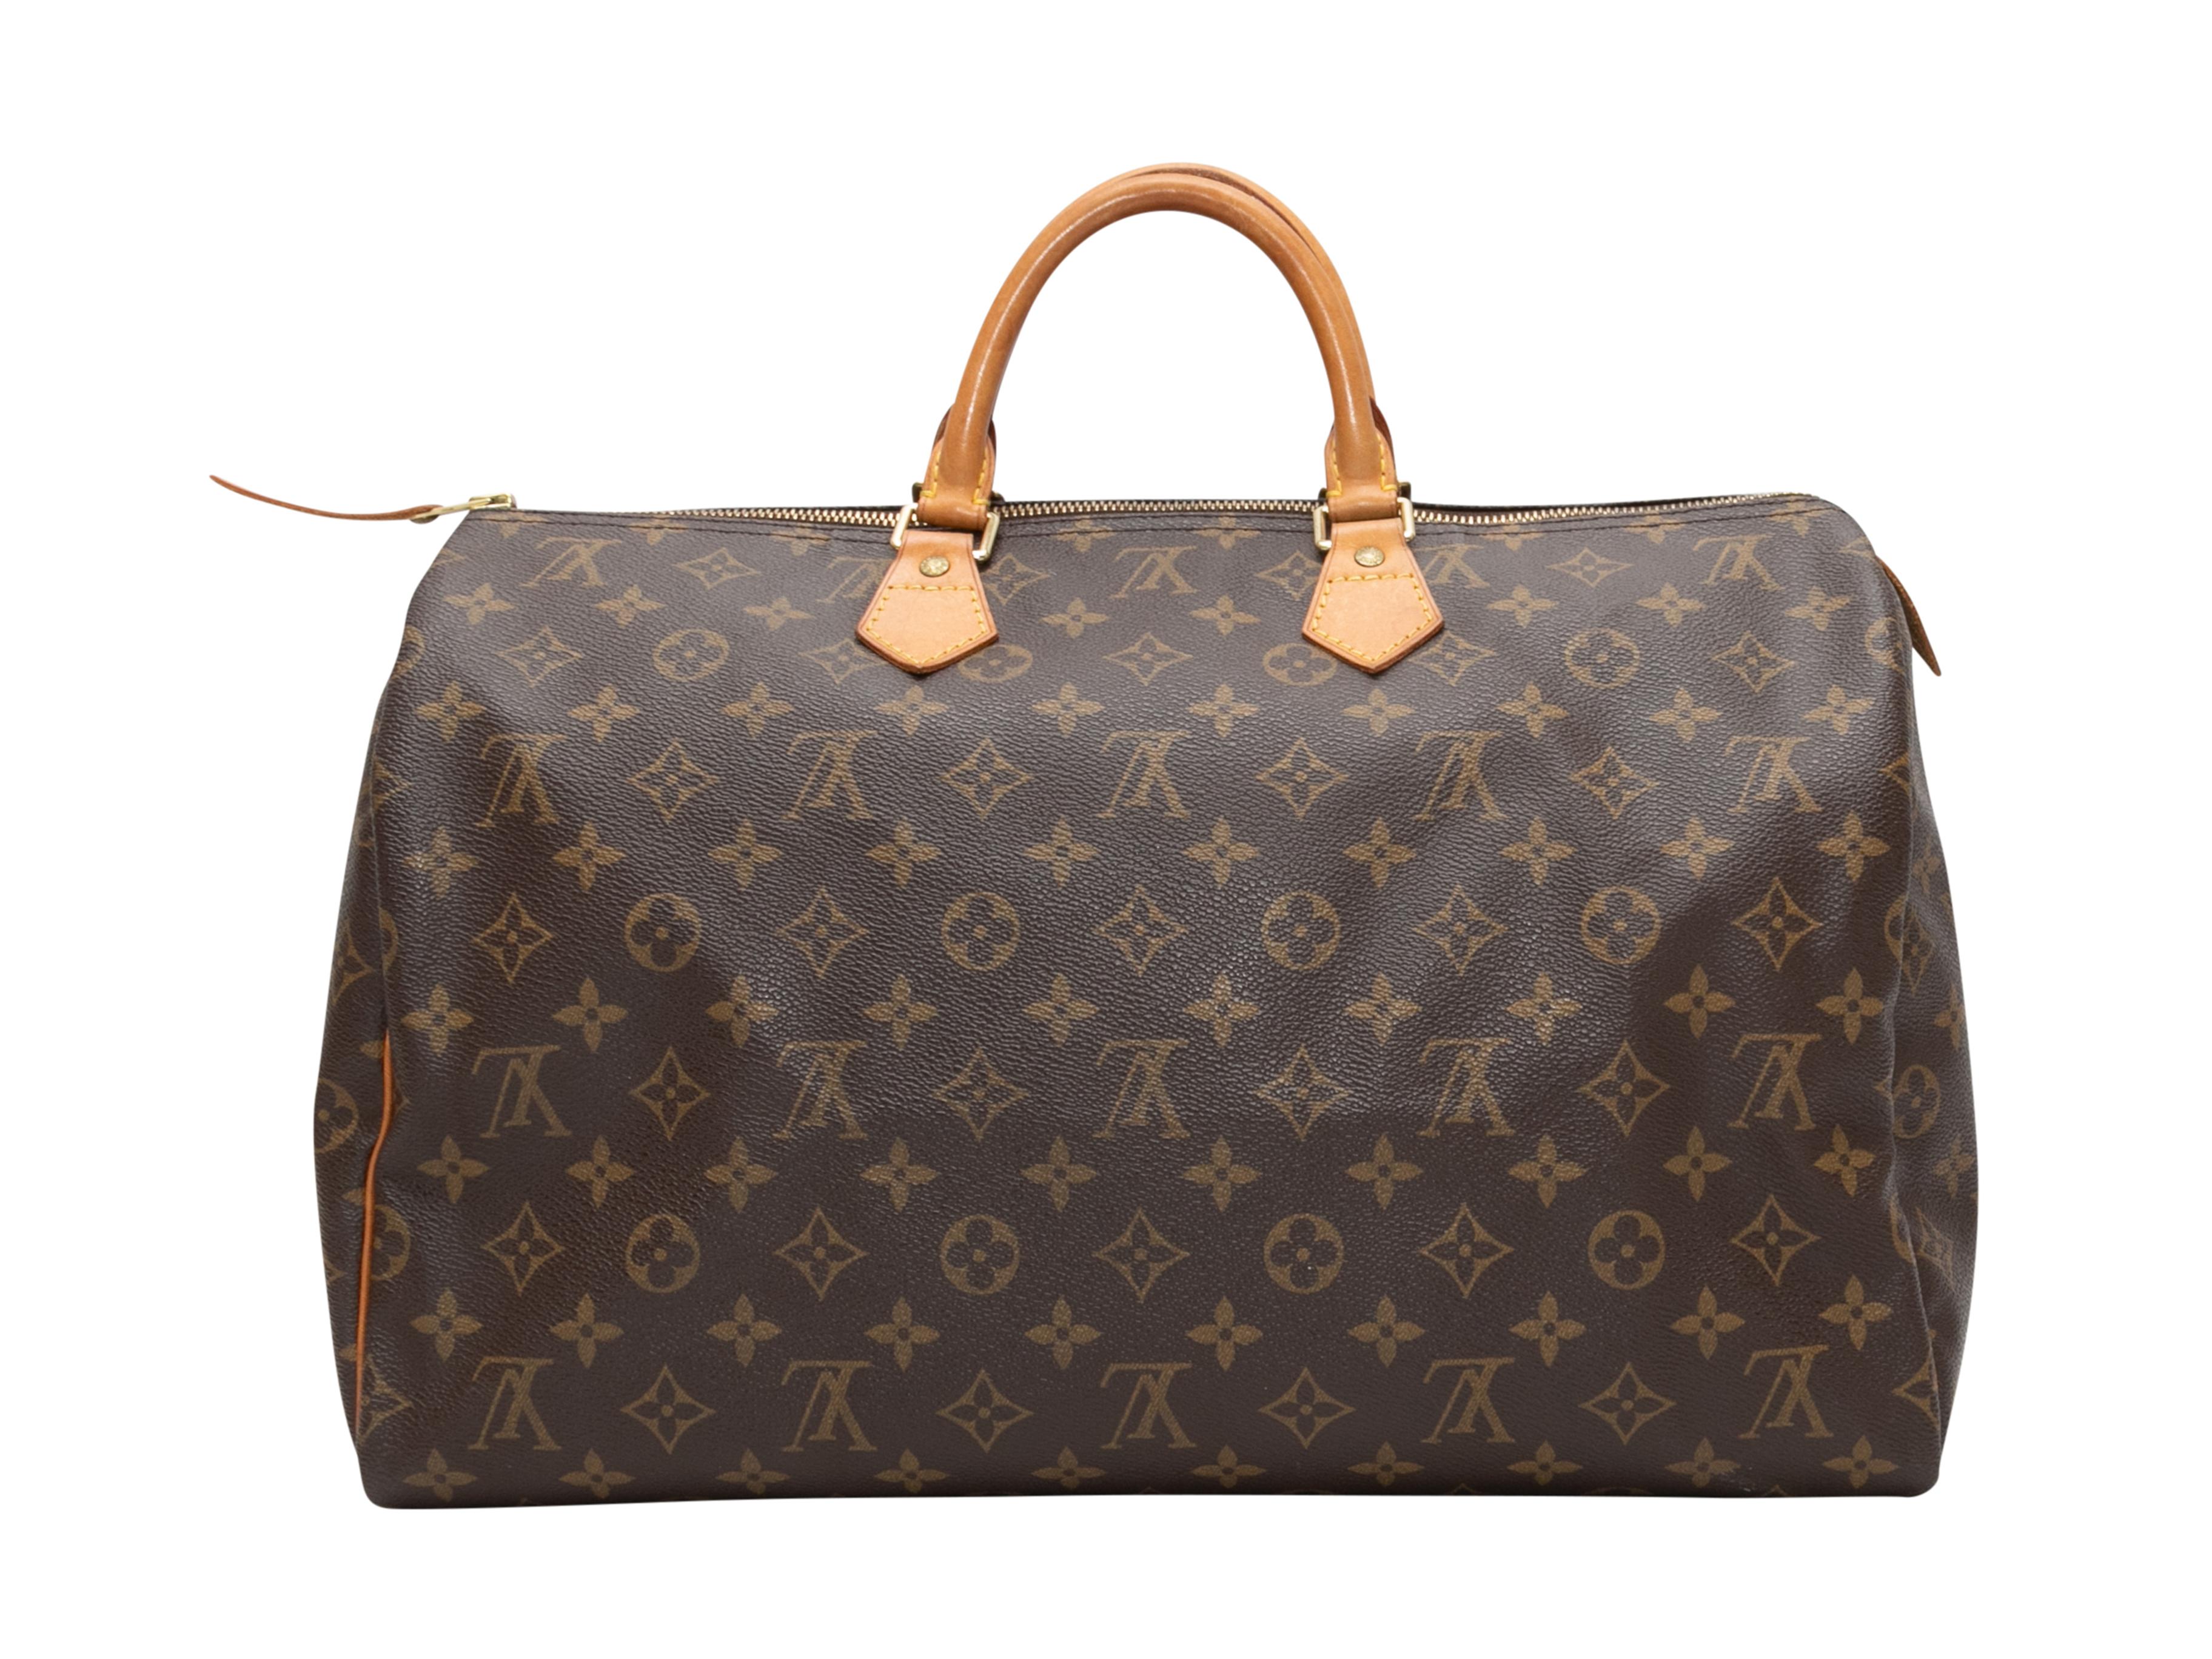 Brown Louis Vuitton Monogram Speedy 30. The Speedy 30 features a coated canvas body, leather trim, gold-tone hardware, dual rolled top handles, and a top zip closure. 15